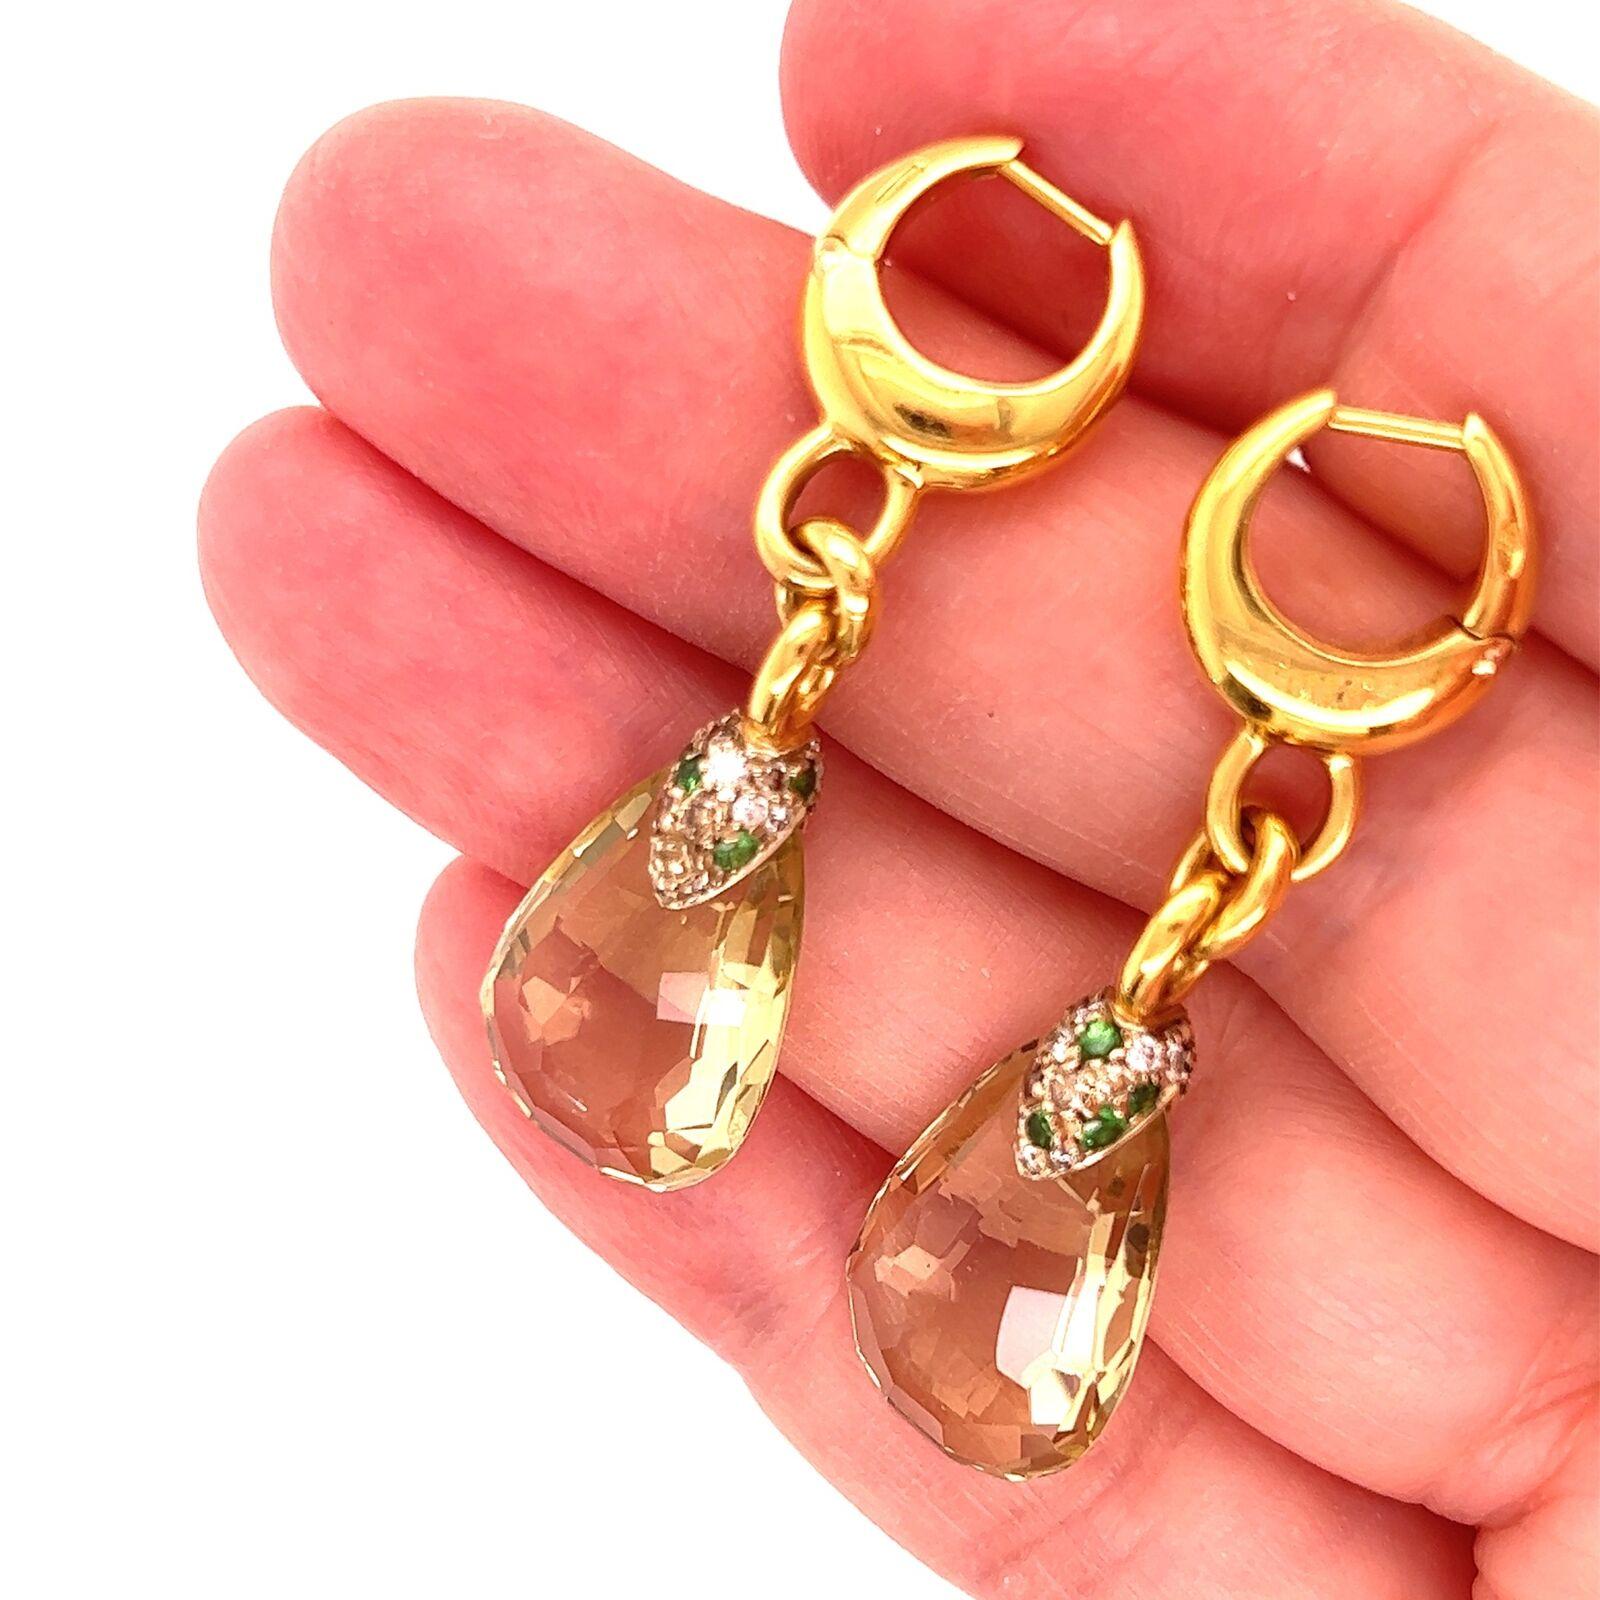 Gorgeous and authentic by Pomellato from the Pin Up Collection. These earrings are crafted from 18k yellow gold with a baby hoop top with posts snap closure, dangling from 3 oval link chain is a large lemon citrine drop with faceted cut, the bail